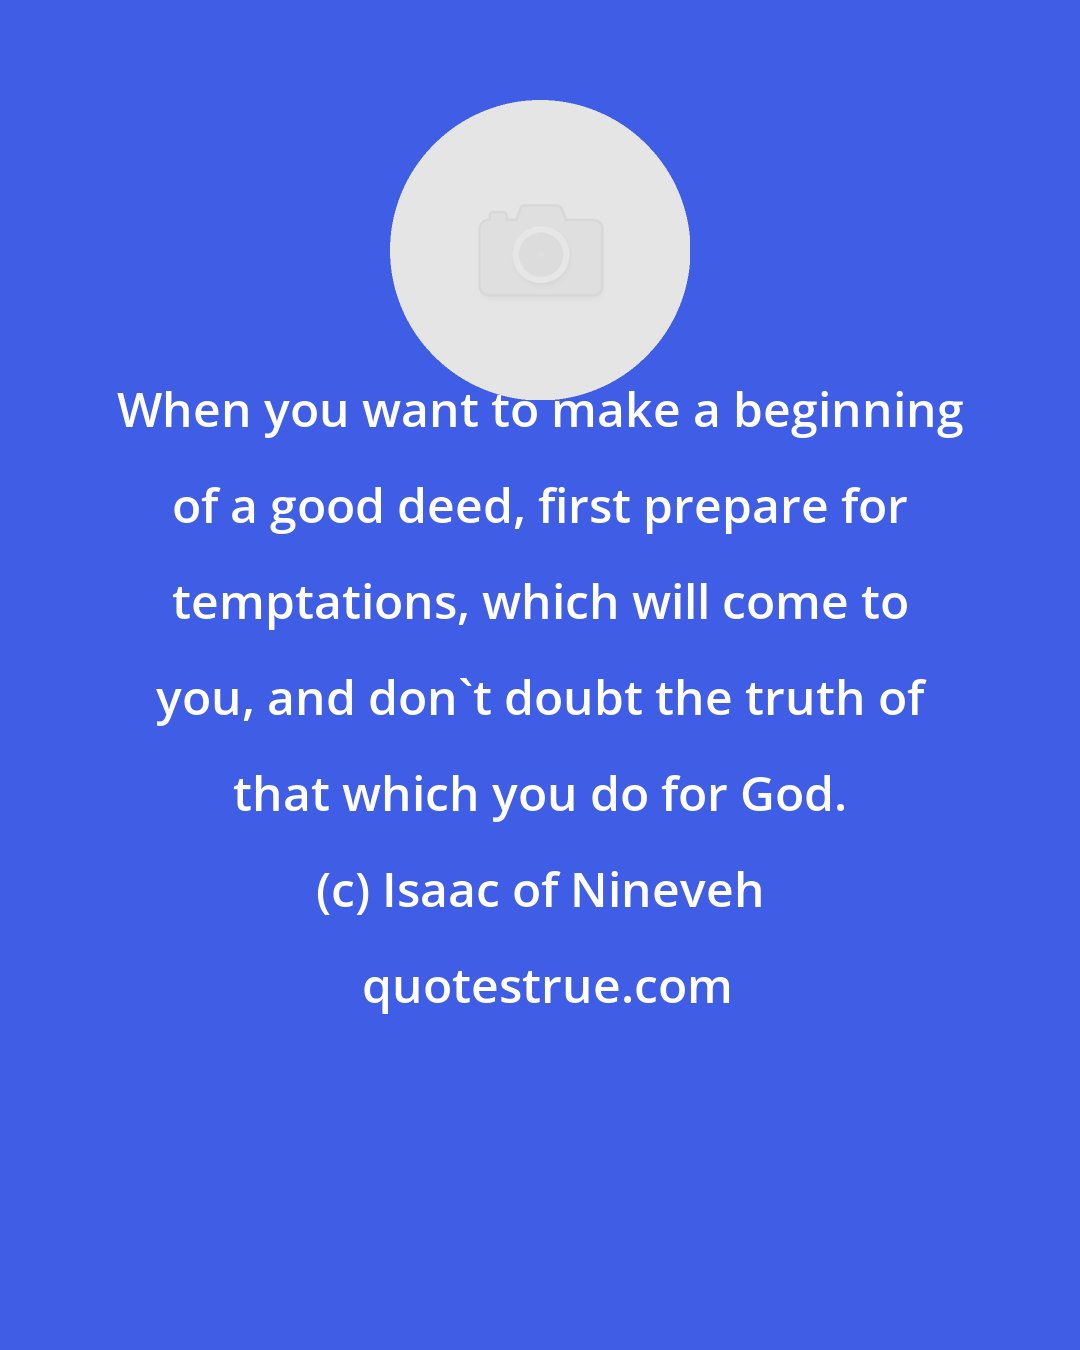 Isaac of Nineveh: When you want to make a beginning of a good deed, first prepare for temptations, which will come to you, and don't doubt the truth of that which you do for God.